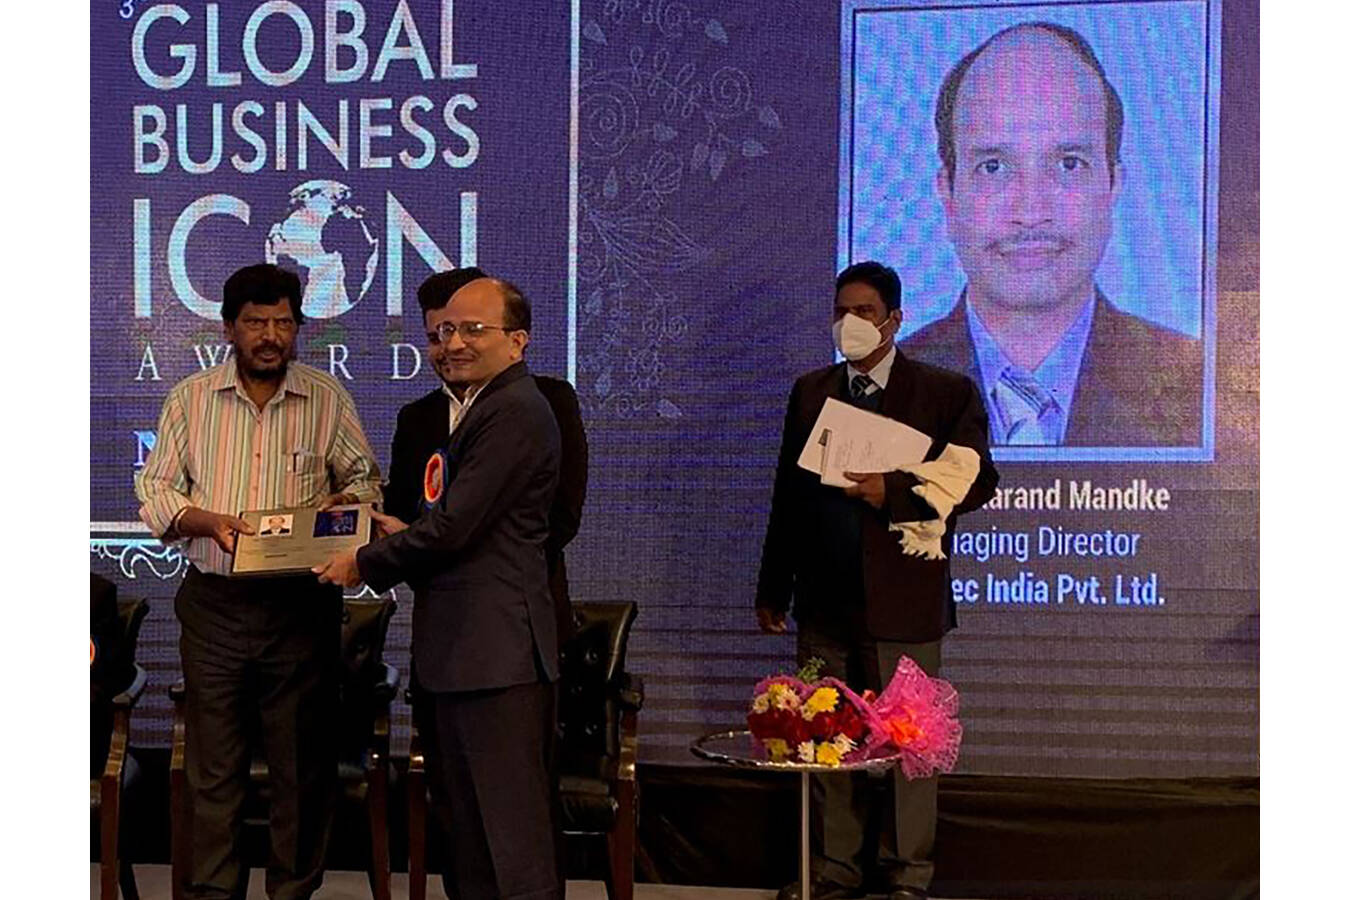 Makarand Mandke, Managing Director of Sesotec India (front), is delighted to be presented with the “Global Business Icon Award 2021”